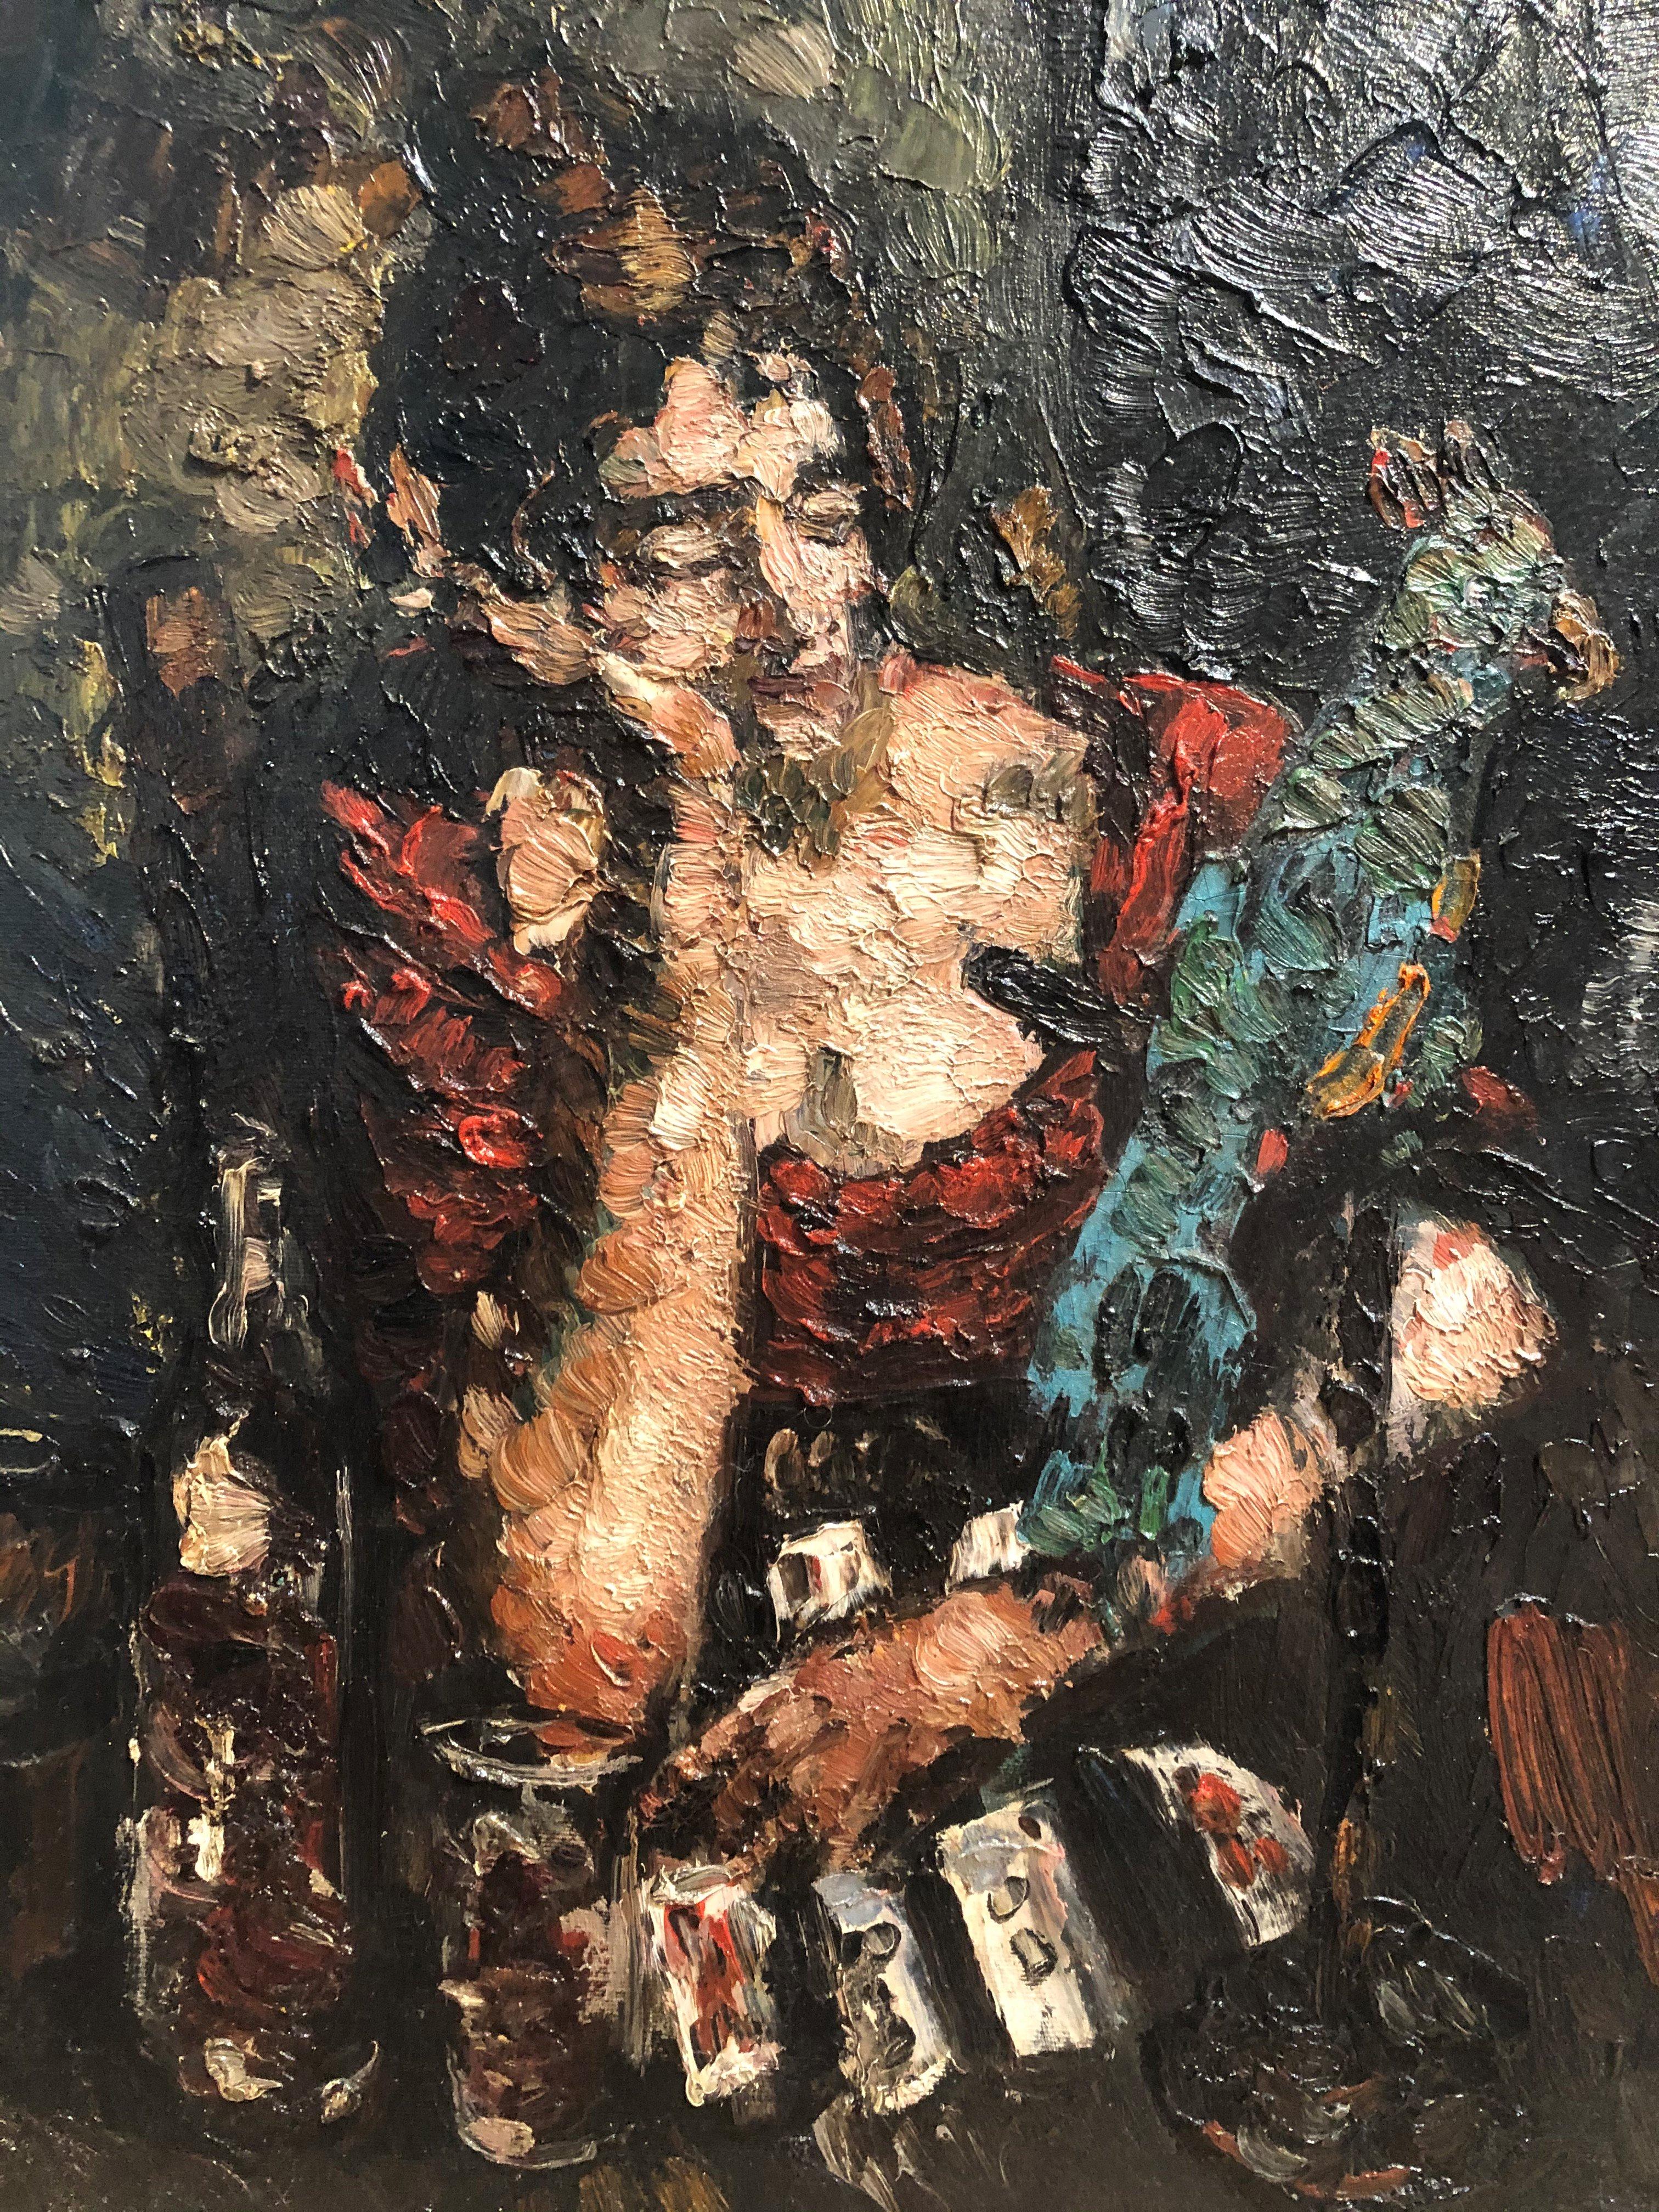 Leon Kelly (American, 1901 - 1982)
The Fortune Teller (Woman with Playing Cards, a Bottle of Wine, and a Parrot), circa 1926
Oil on canvasboard
20 x 16 inches
Signed lower right
Housed in a distressed wooden frame

Leon Kelly is admired as one of